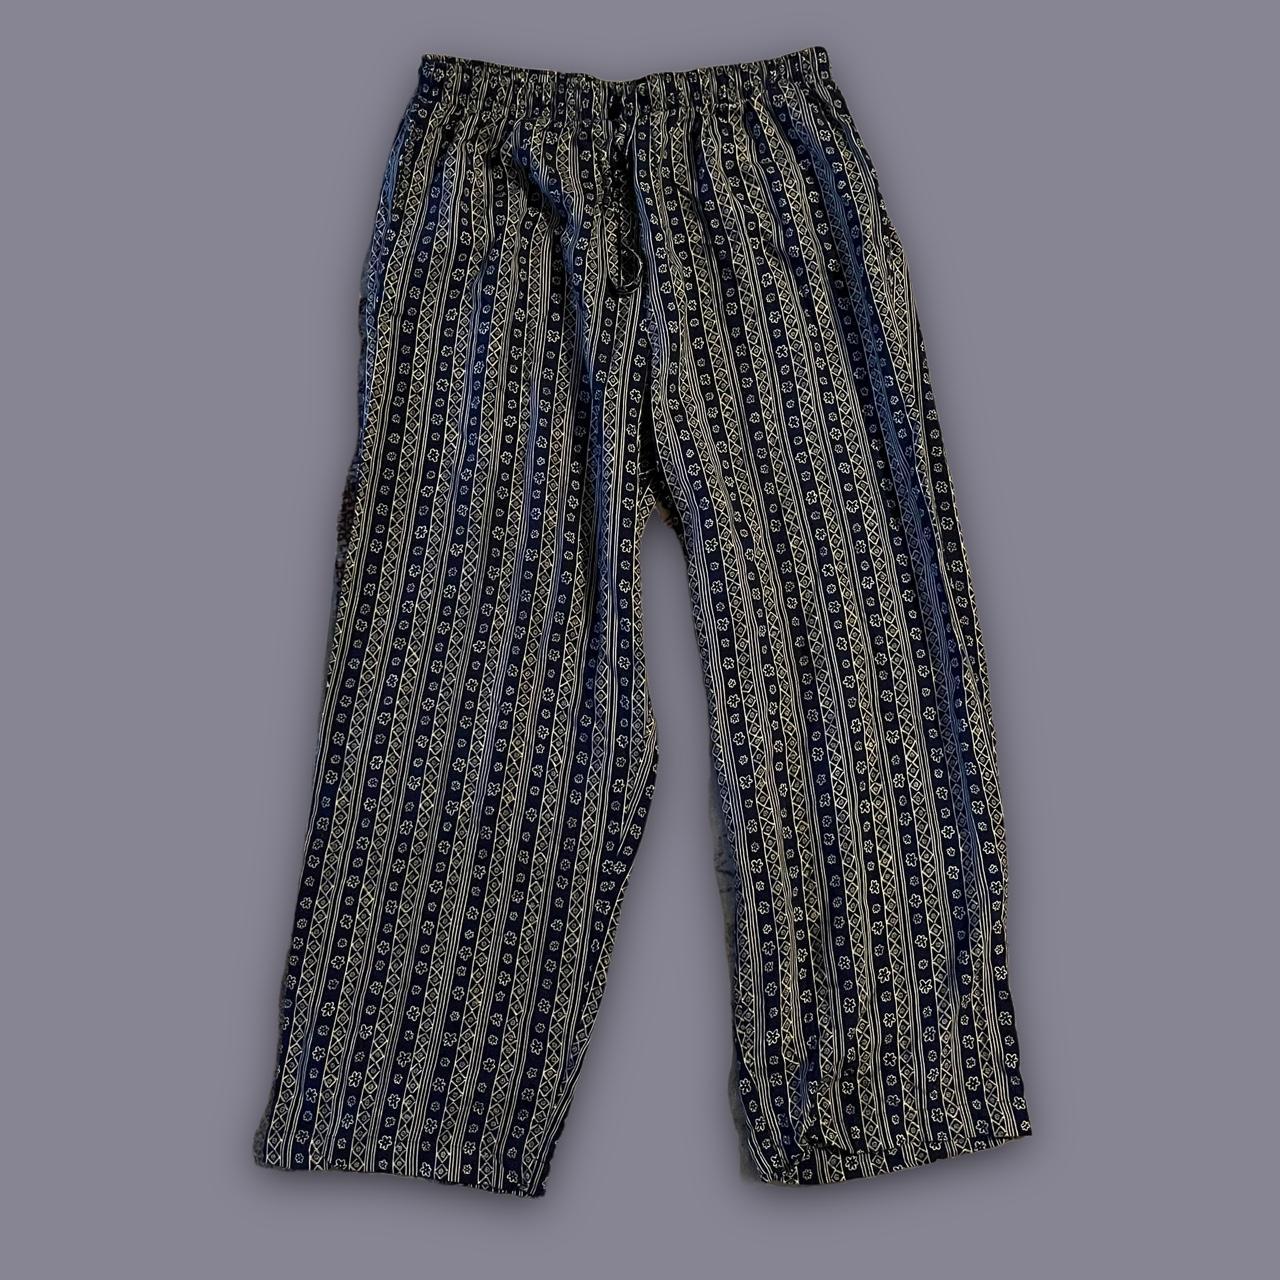 Sag Harbor Women's Navy and Yellow Trousers